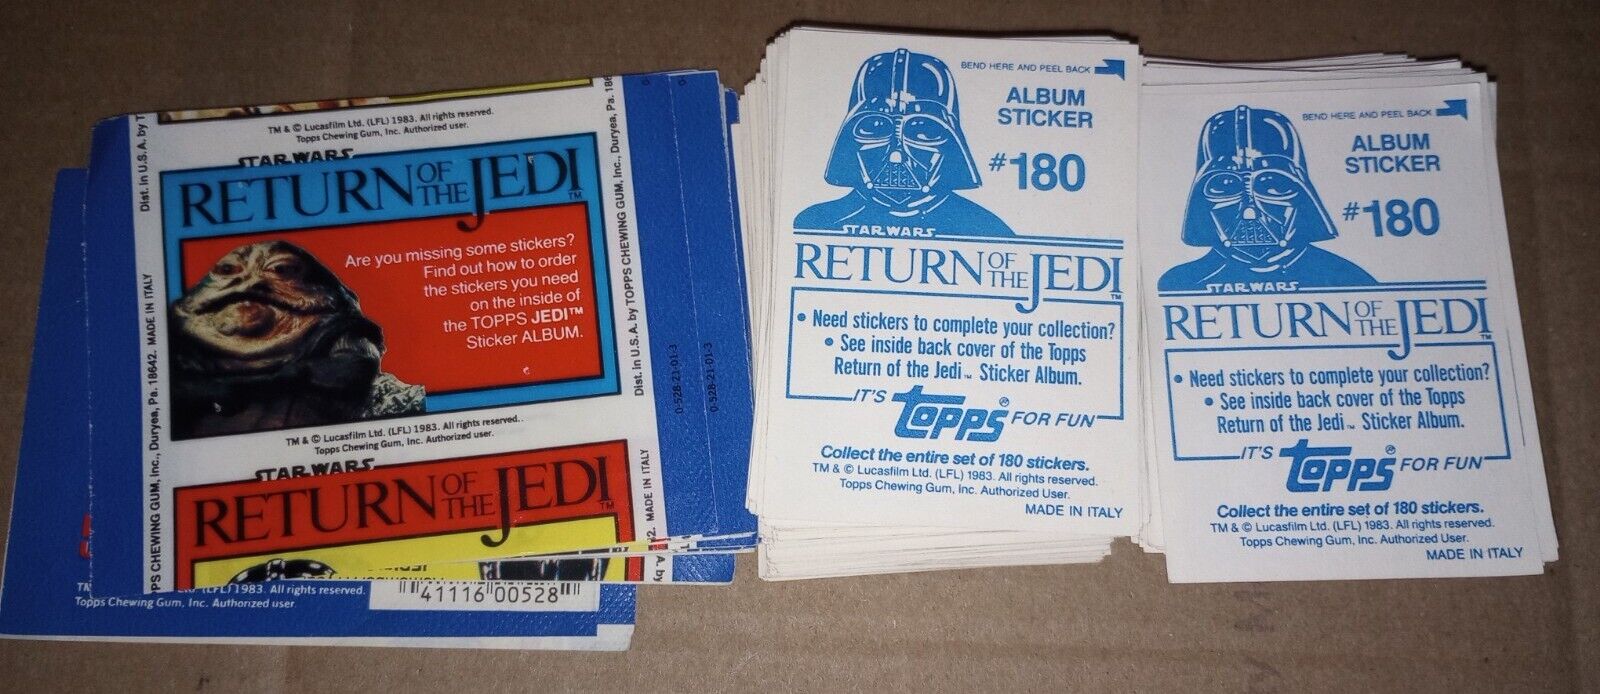 1983 TOPPS ROTJ CARDS 2 INCOMPLETE SETS AS IS SALE MISSING NUMBERS ARE IN THE...